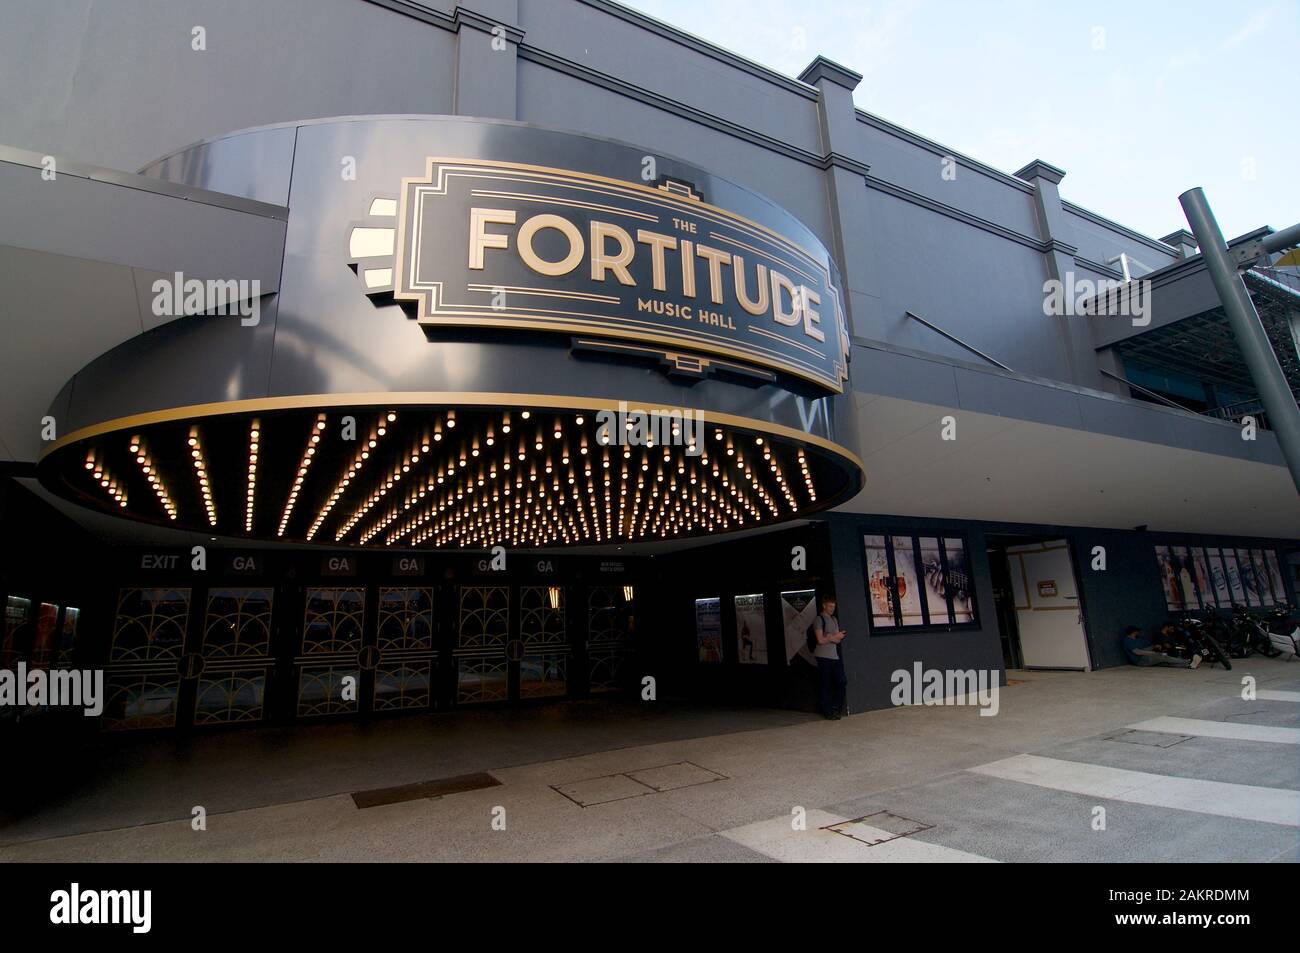 Brisbane, Queensland, Australia - 13th November 2019 : View of the Art Deco inspired Fortitude music hall entrance located in Fortitude Valley distric Stock Photo